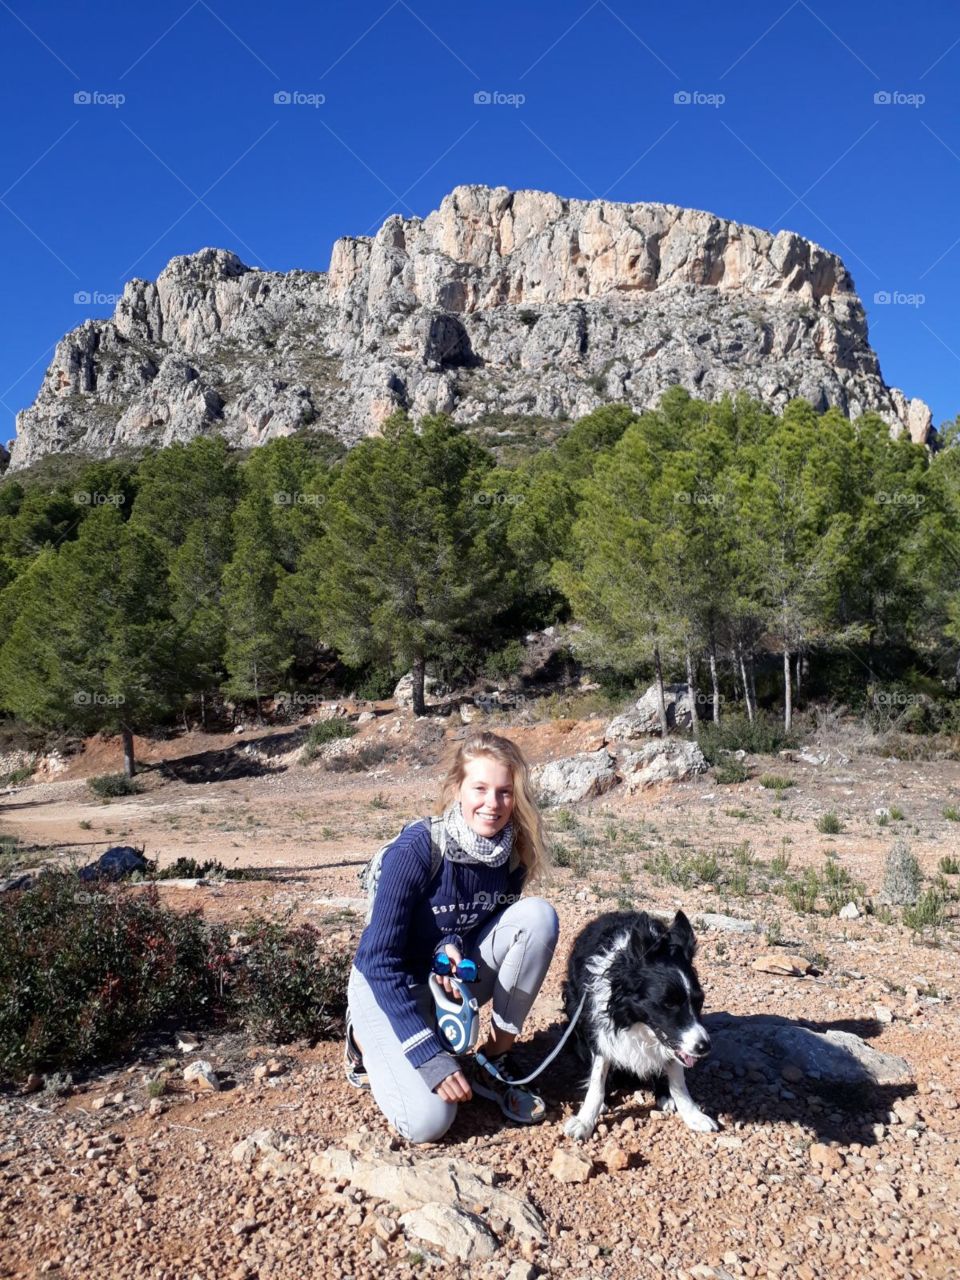 Me and my dog at the mountain